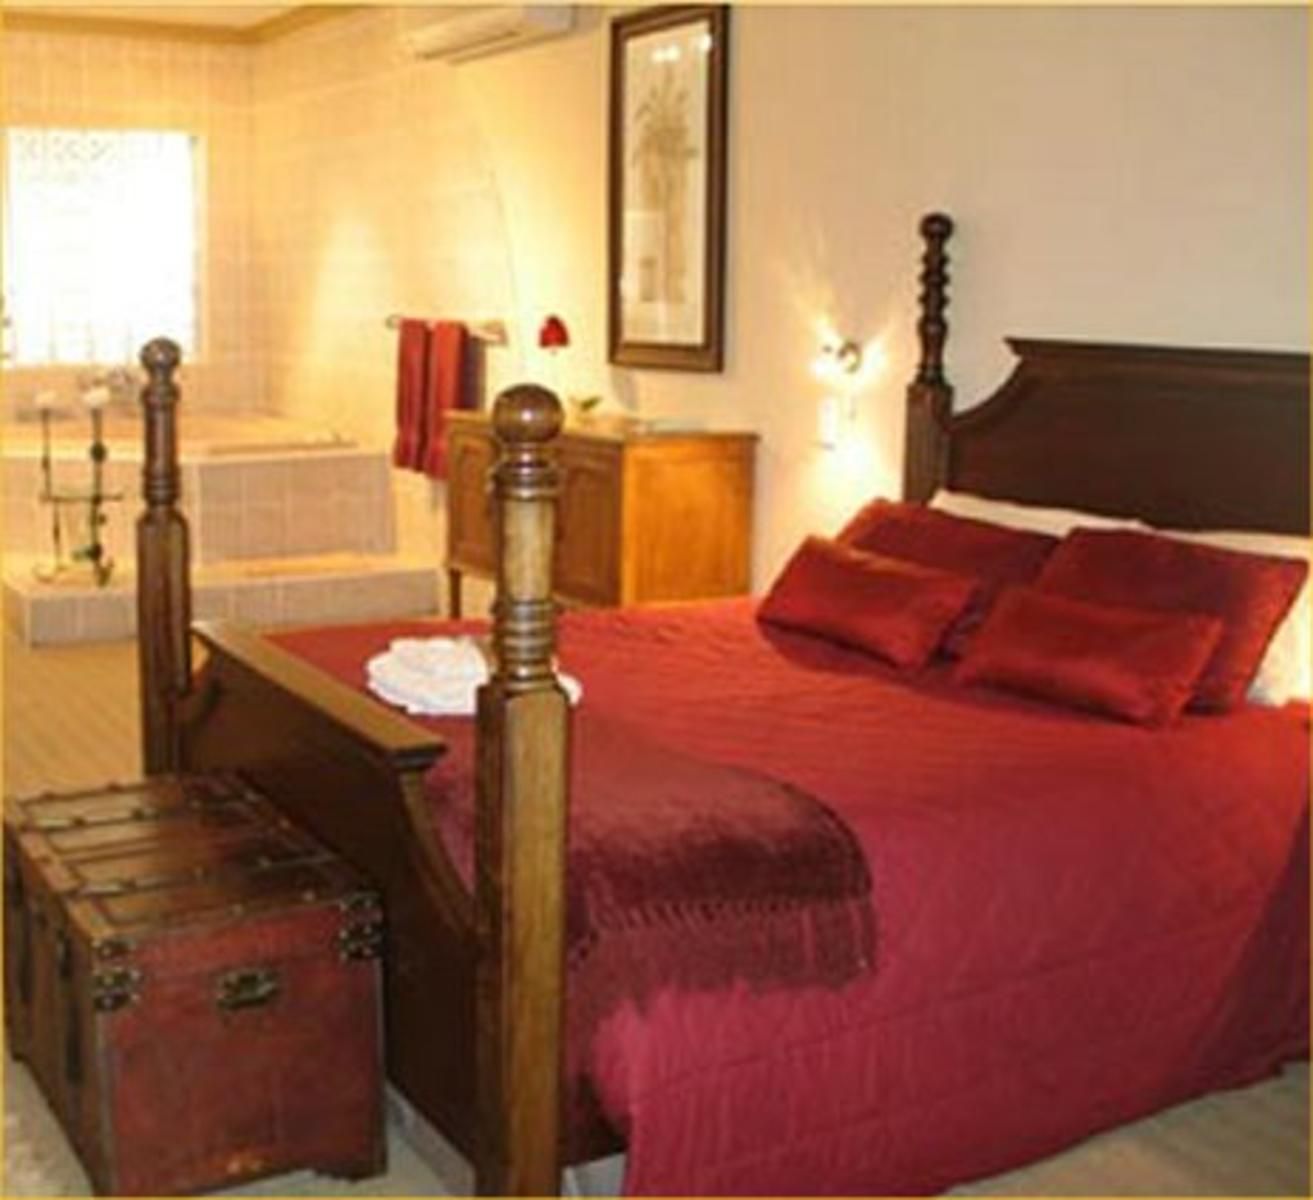 Everwood Guest House Wilkoppies Klerksdorp North West Province South Africa Colorful, Bedroom